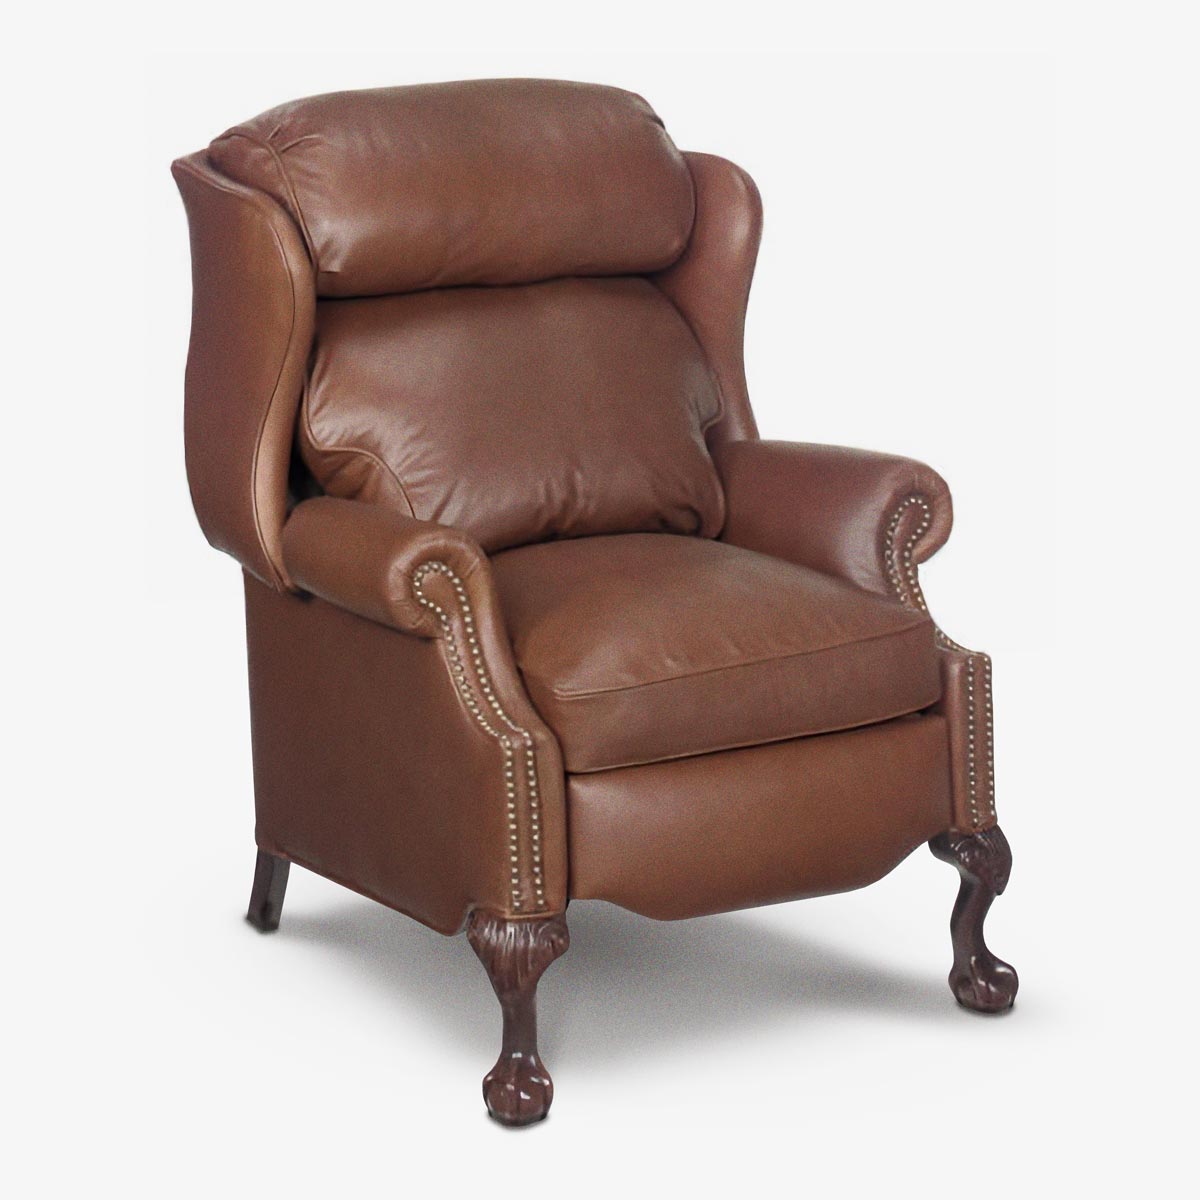 The Harry: American Made Recliner with Ball & Claw Legs